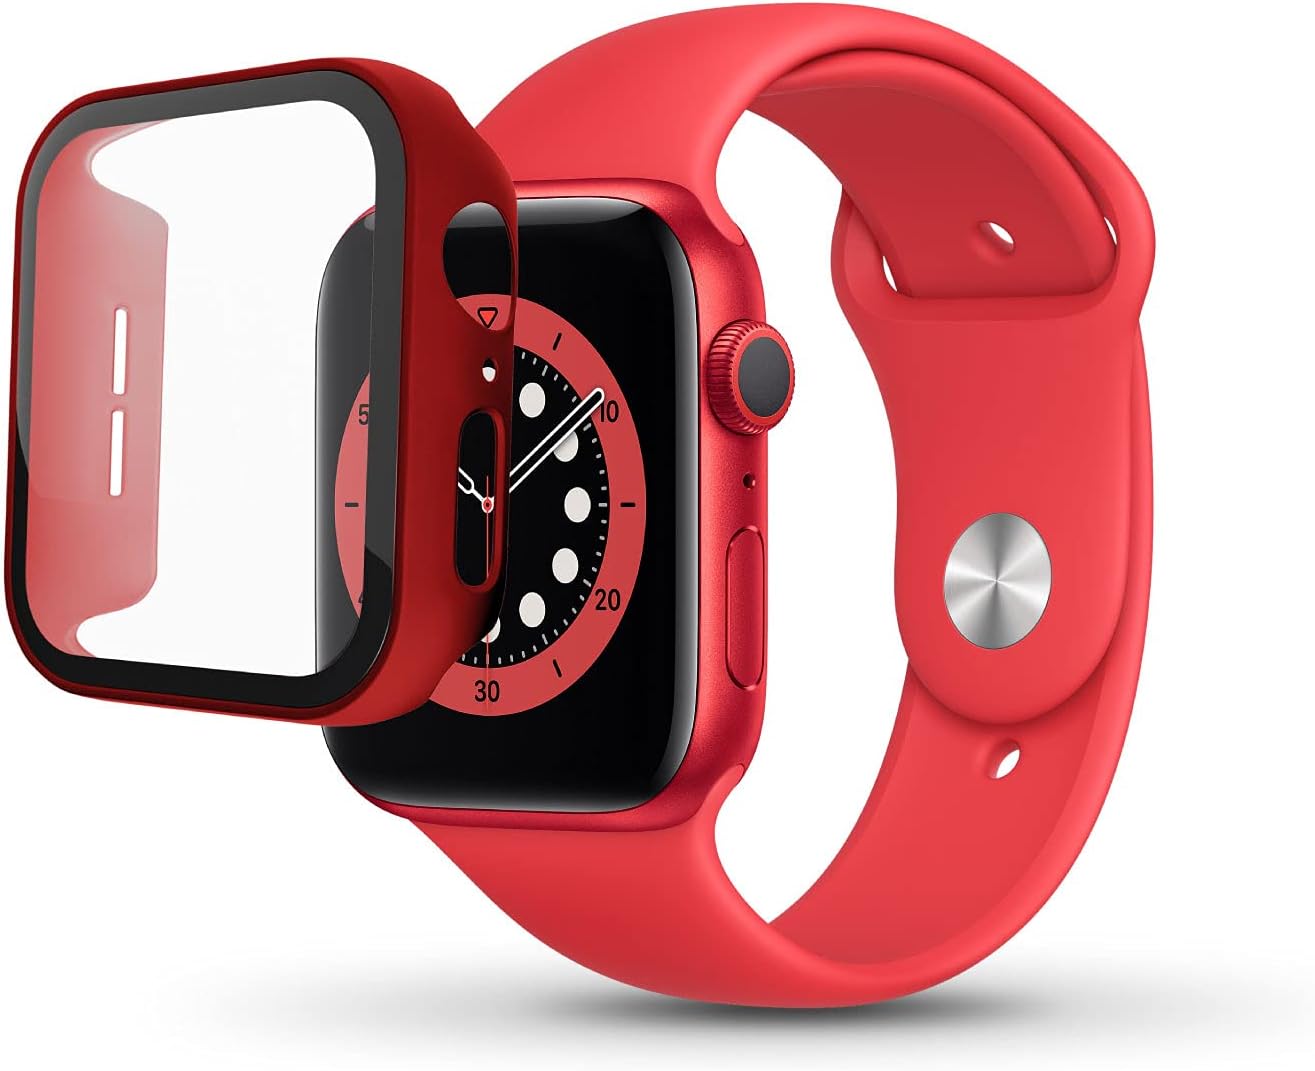 HYPHEN Apple Watch Protector Tempered Glass 44mm - (PRODUCT)RED